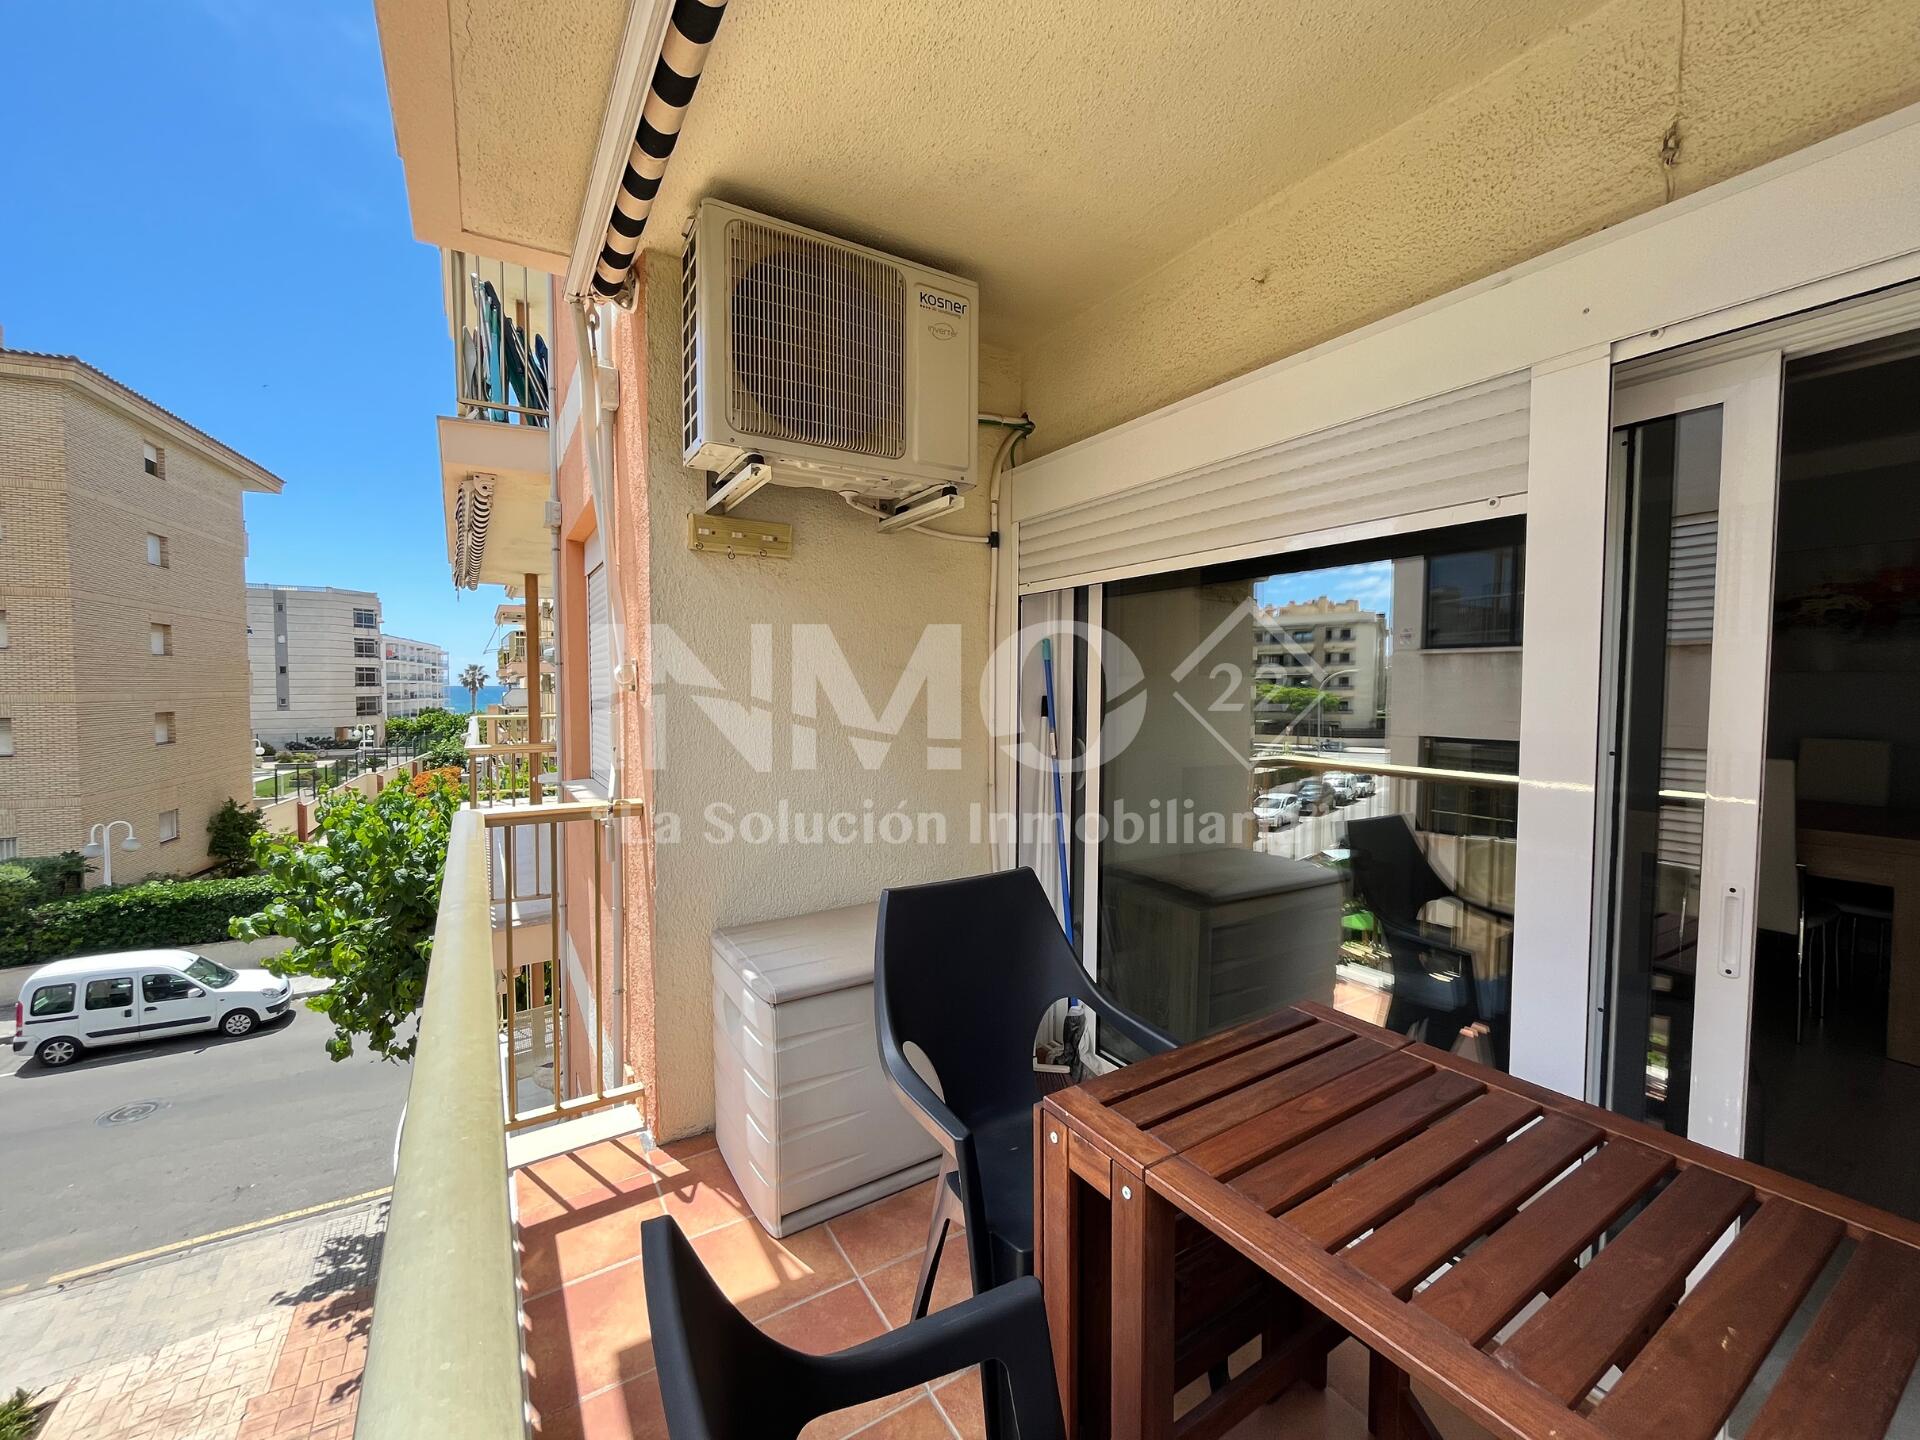 Appartement -
                                            Cambrils -
                                            2 chambres -
                                            6 occupants